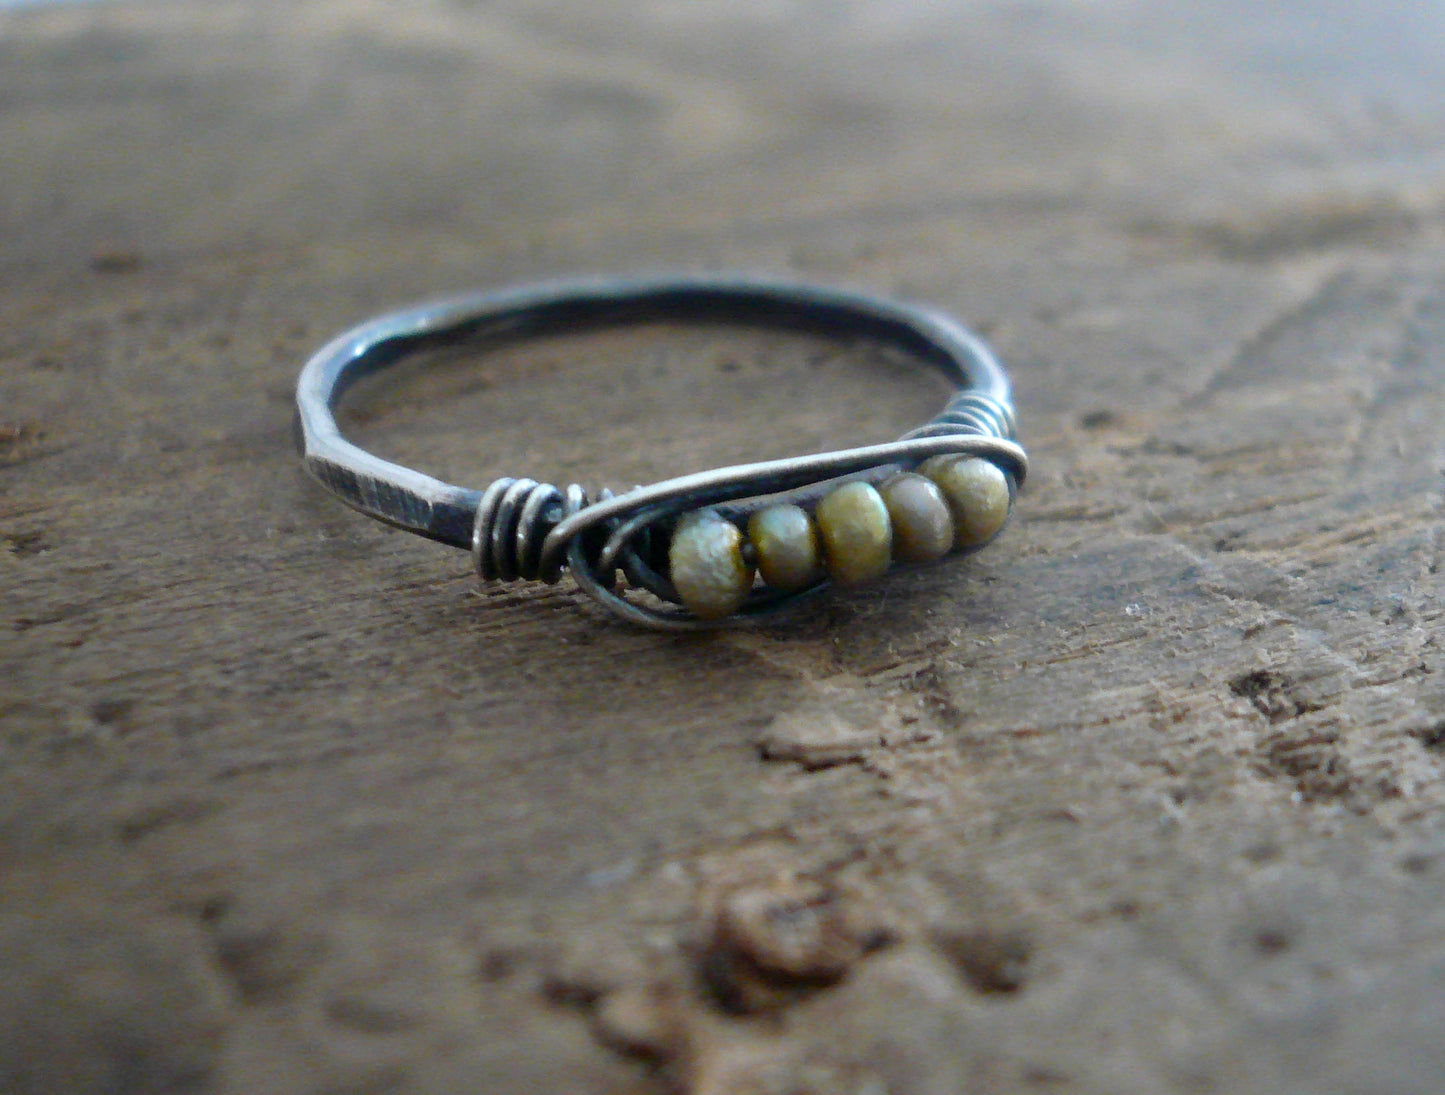 Nestle Ring in Wedgewood - Sterling Silver Stacking Ring. Wire Wrapped Antique European Seed Beads.Hand forged. Handmade by jNicDesigns